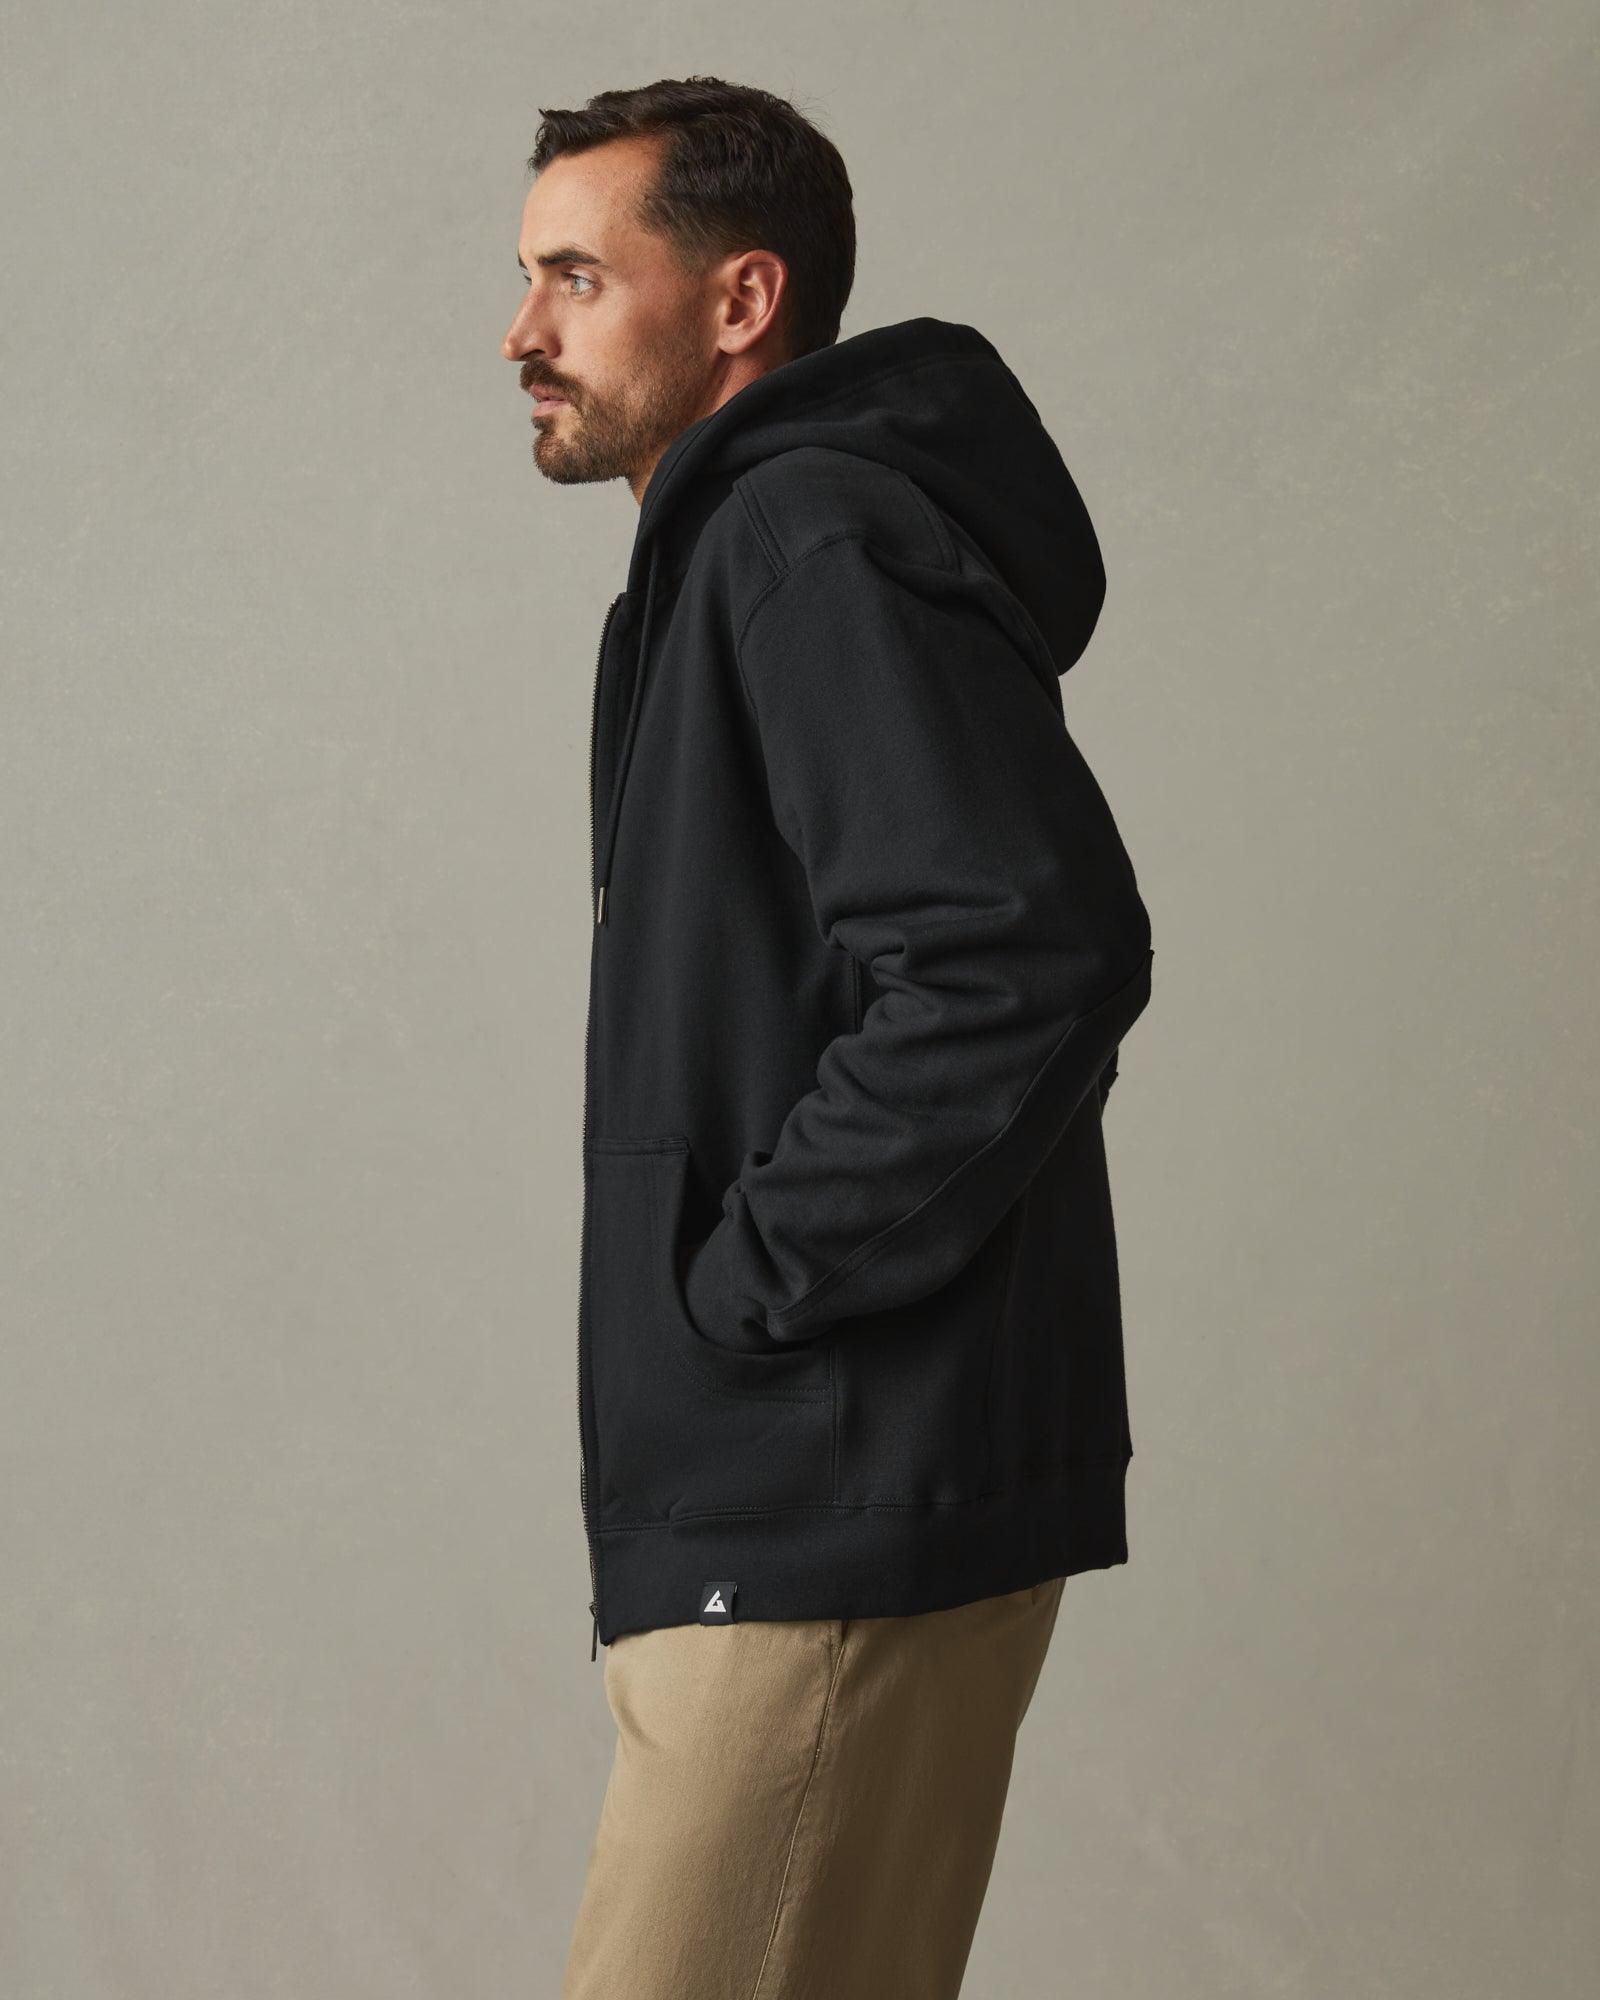 XXL Relaxed Classic Full Zip - Black by American Giant - Made in The USA